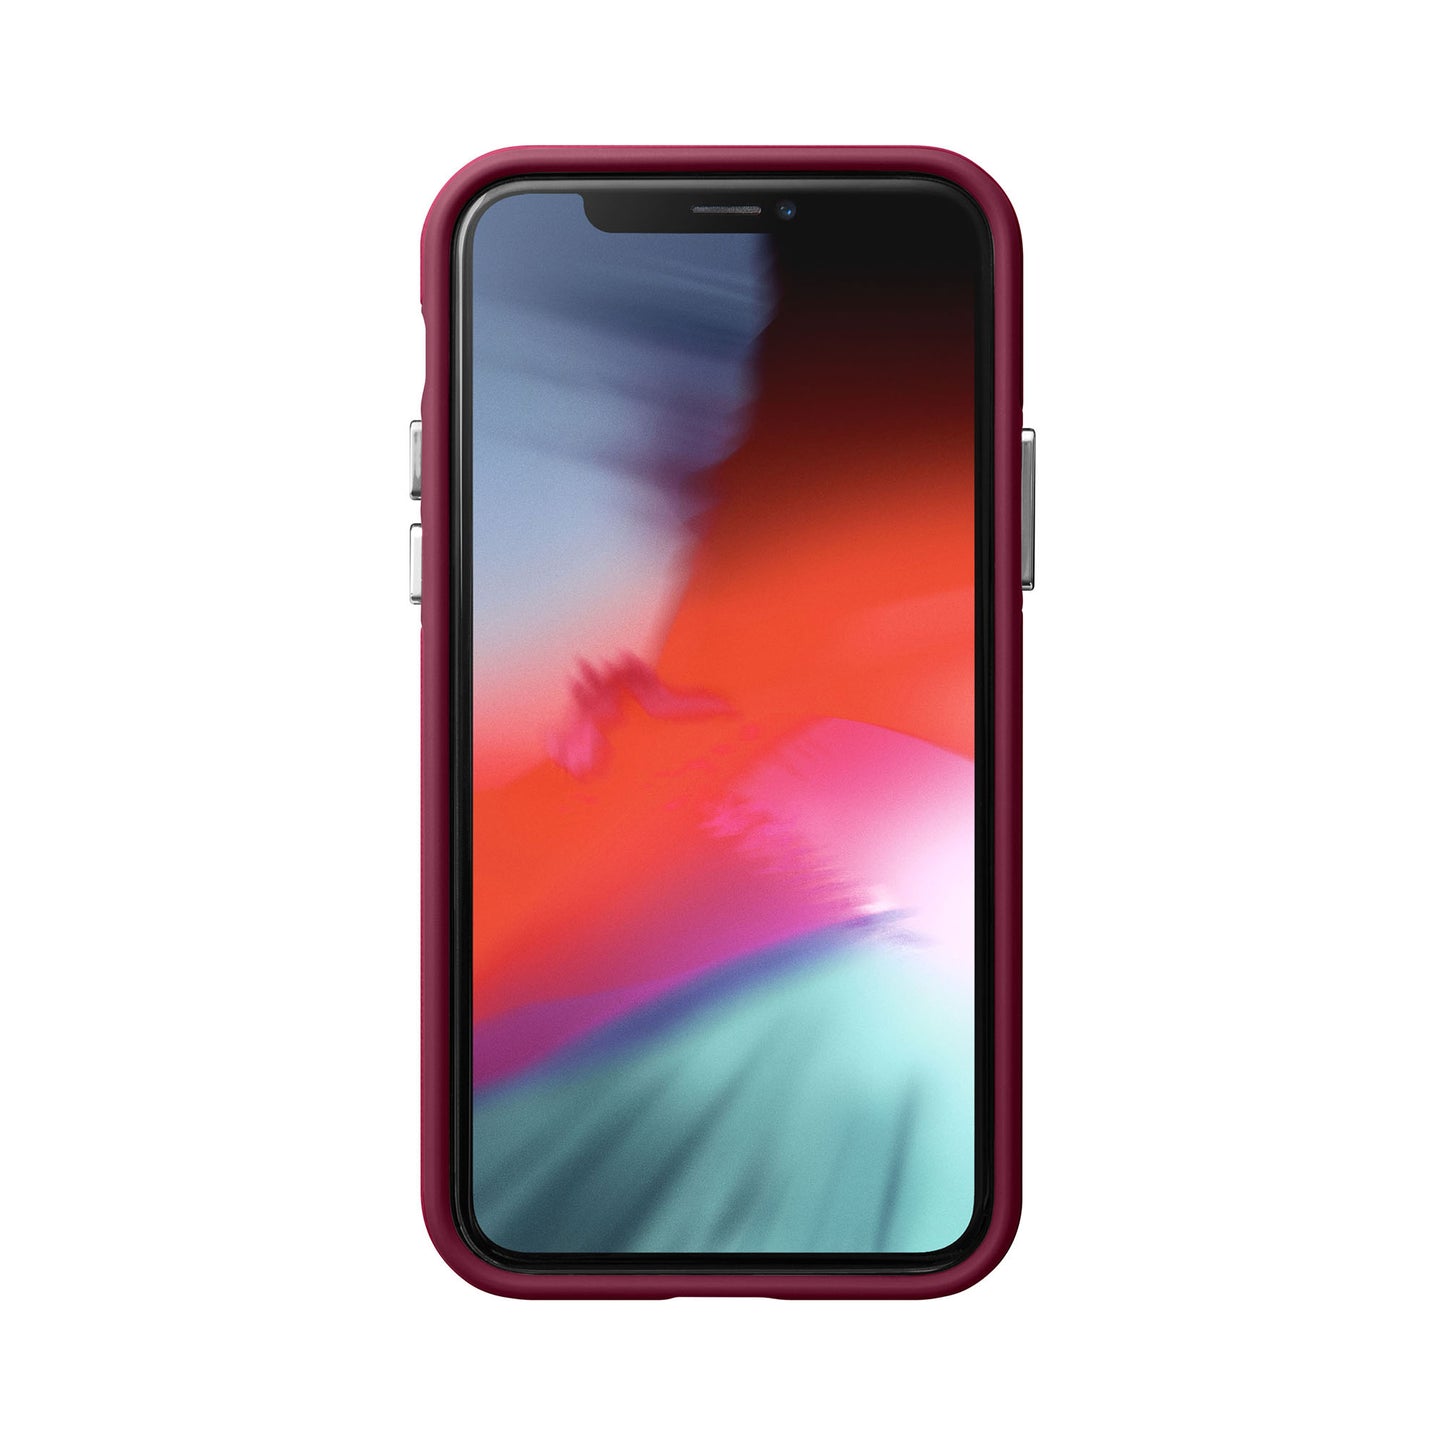 LAUT Shield for iPhone 11 - Cherry